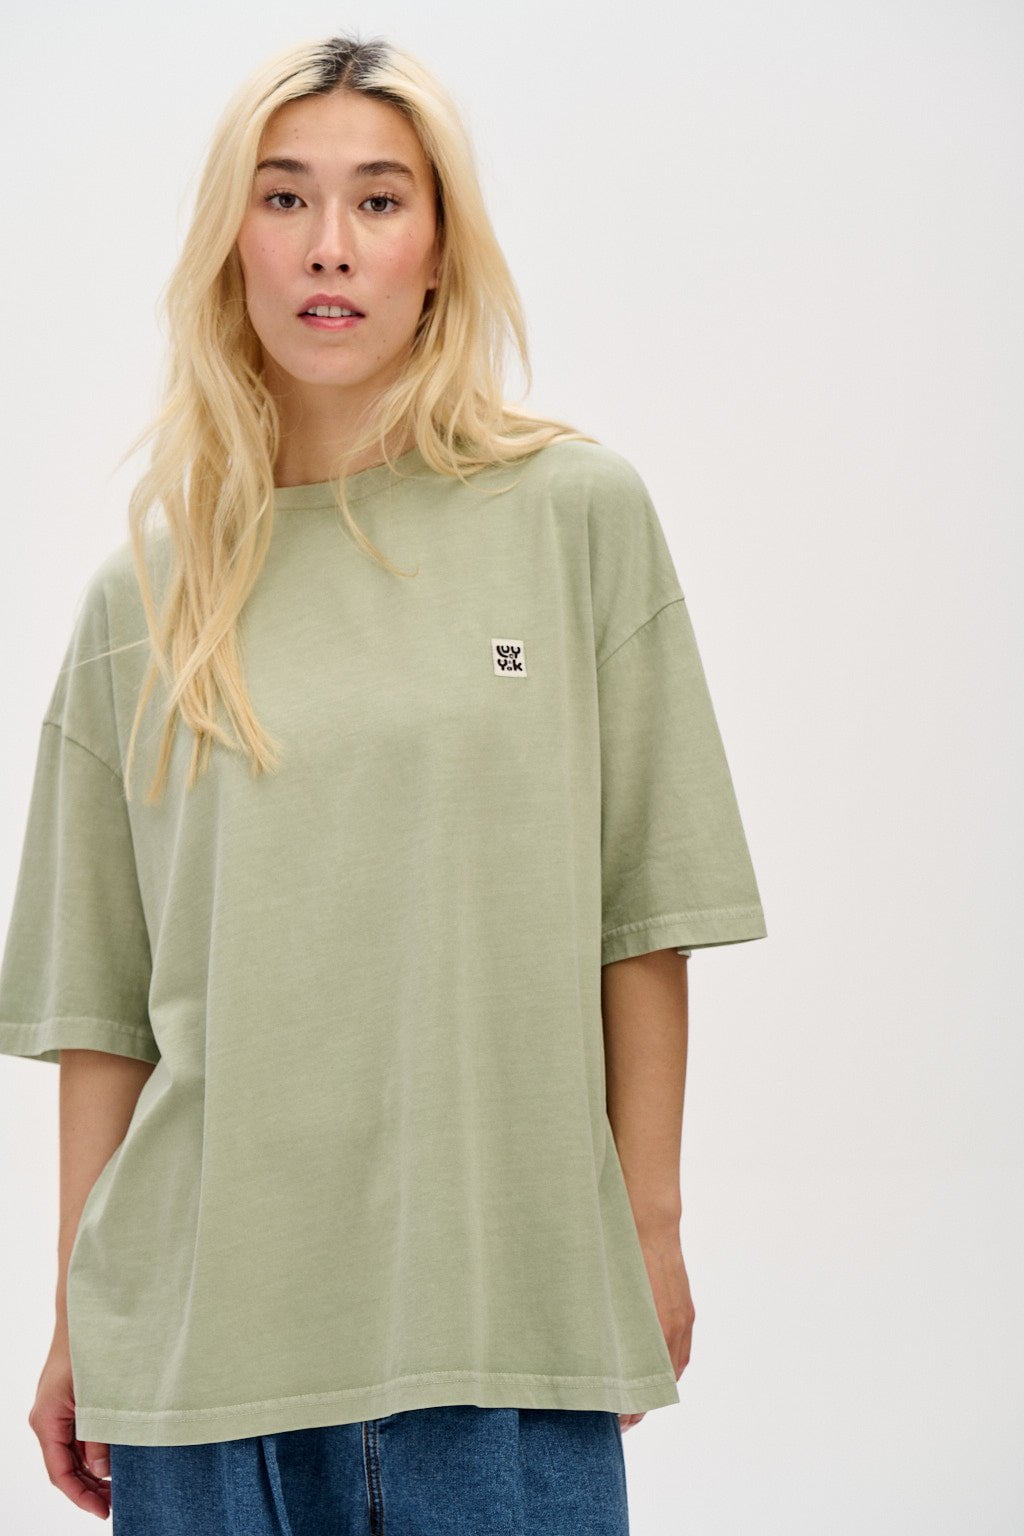 Lucy & Yak Tops Benny Tee: ORGANIC COTTON EARTH PIGMENT- Stone Green